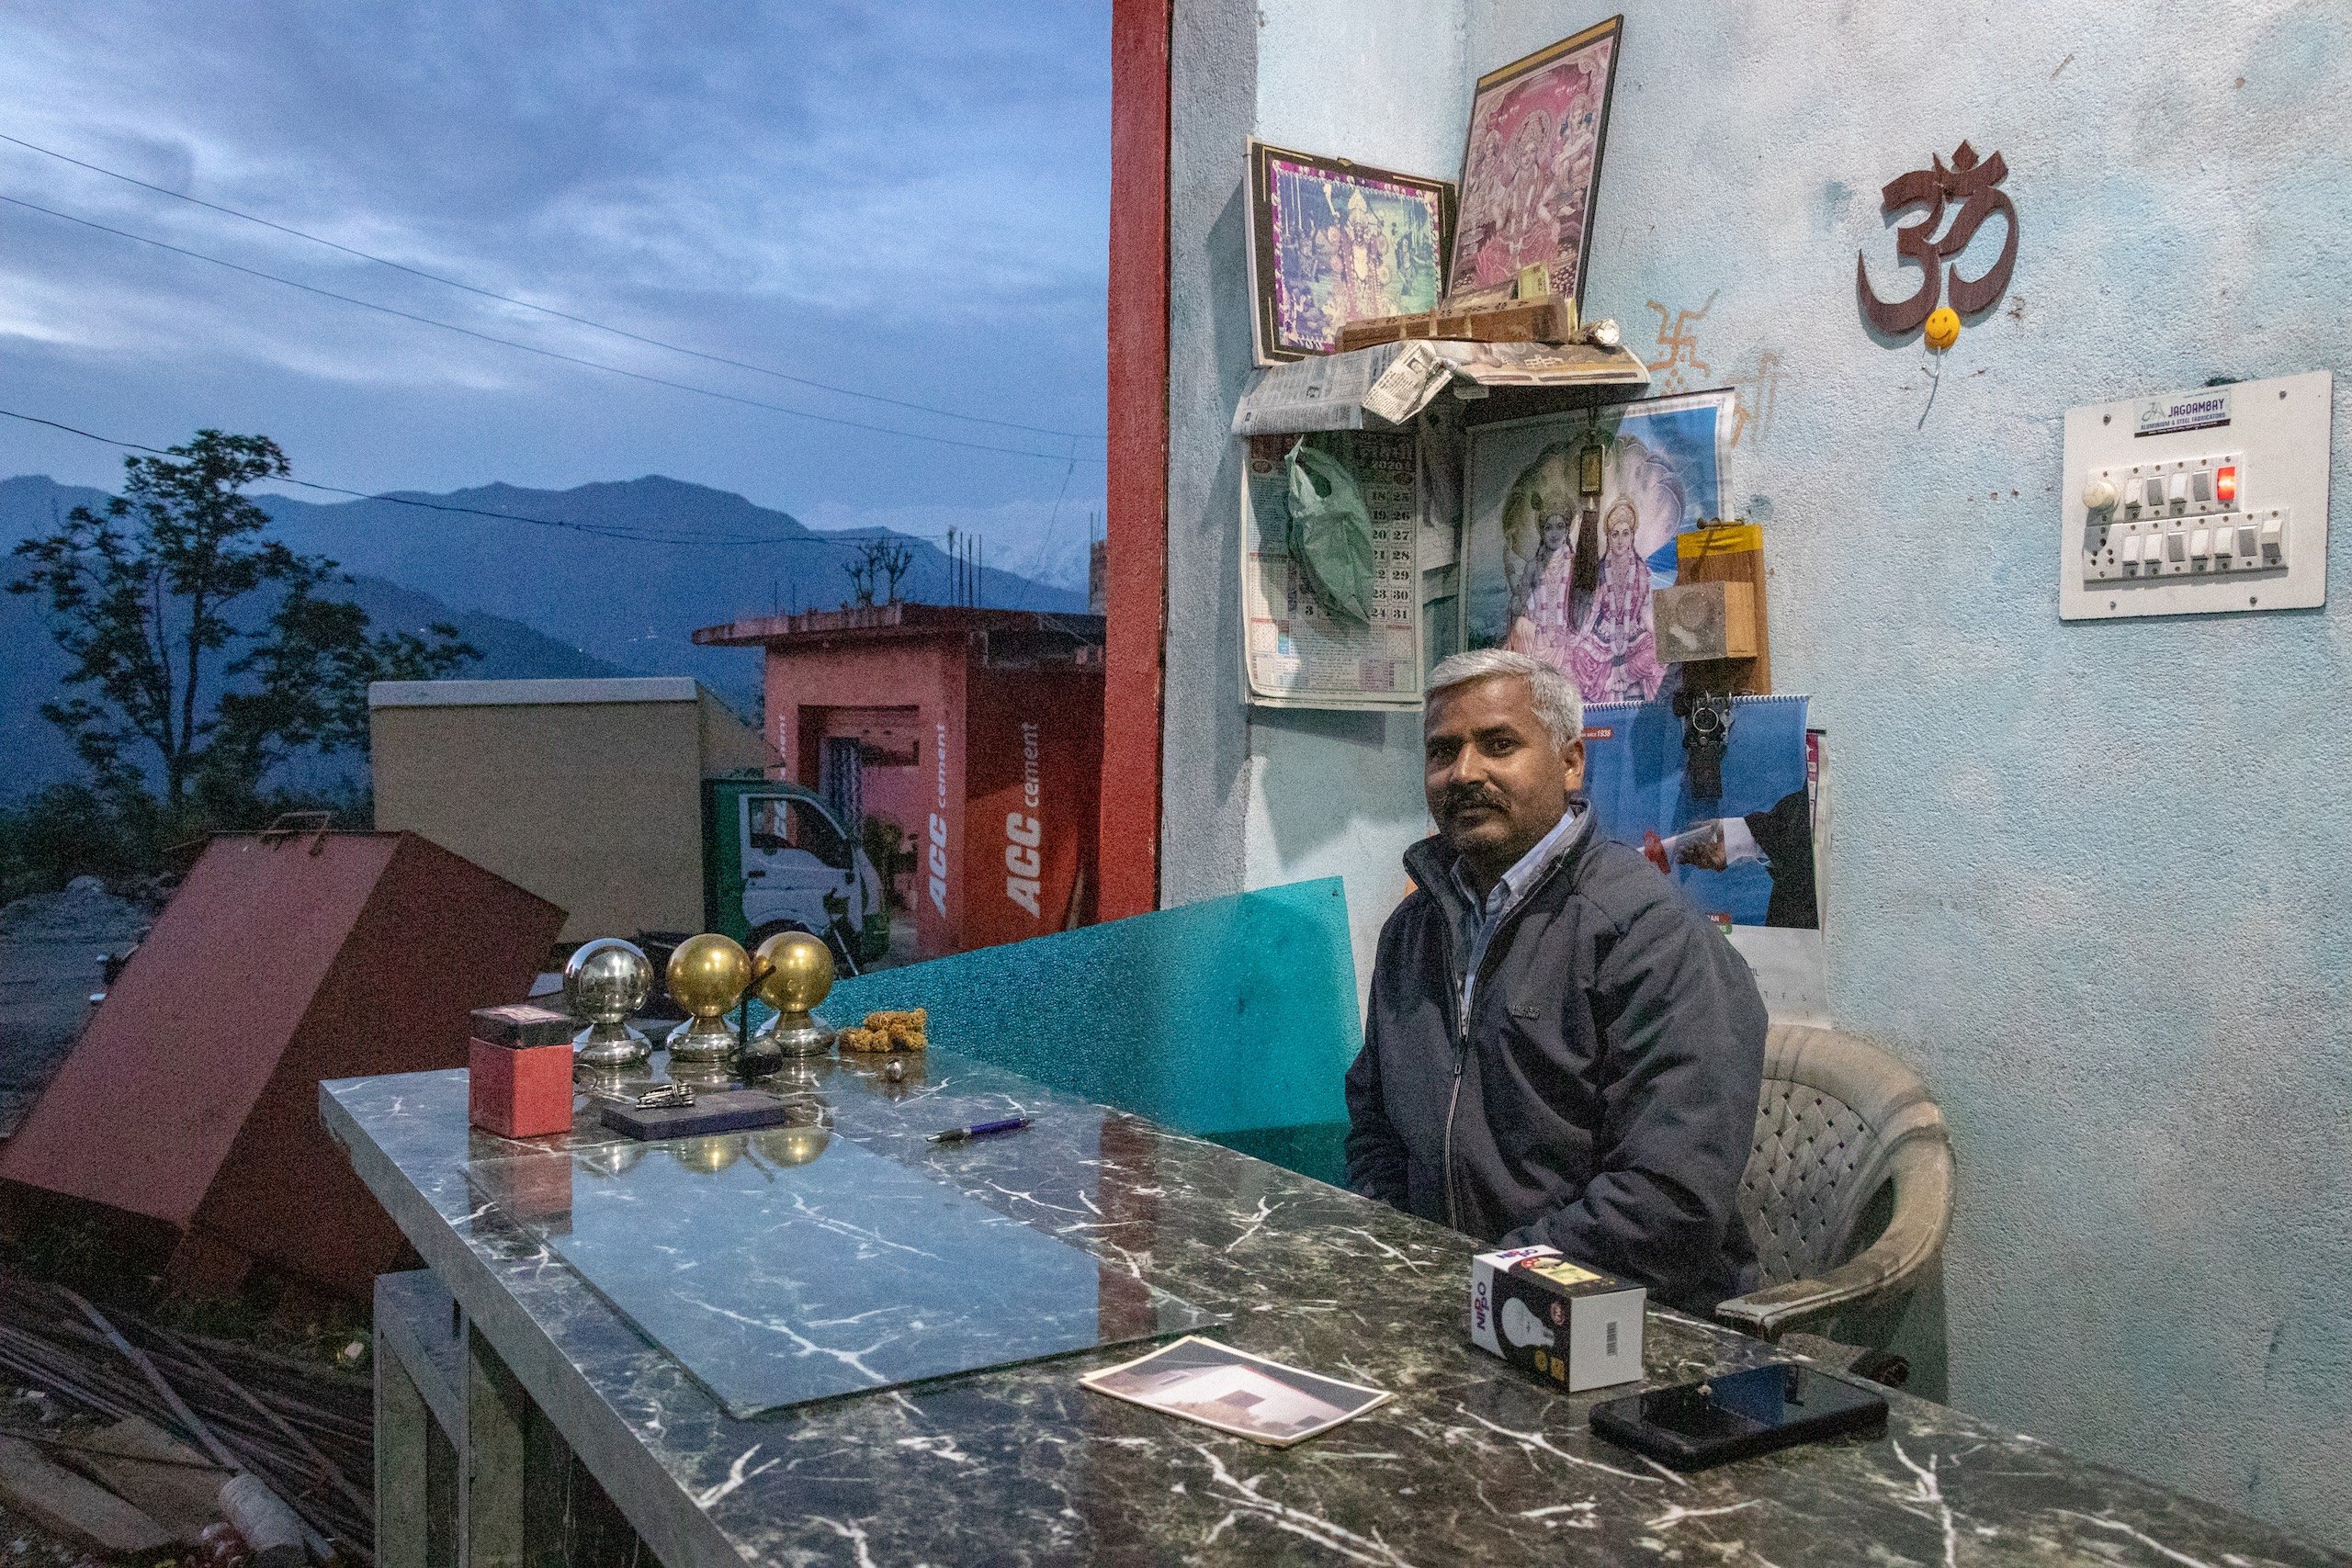 Kartar Nath, 42, fears the loss of the network of clients he has built over the years in Salal village if he has to move due to lithium exploration and mining. (Image : Ashish Kumar Kataria)